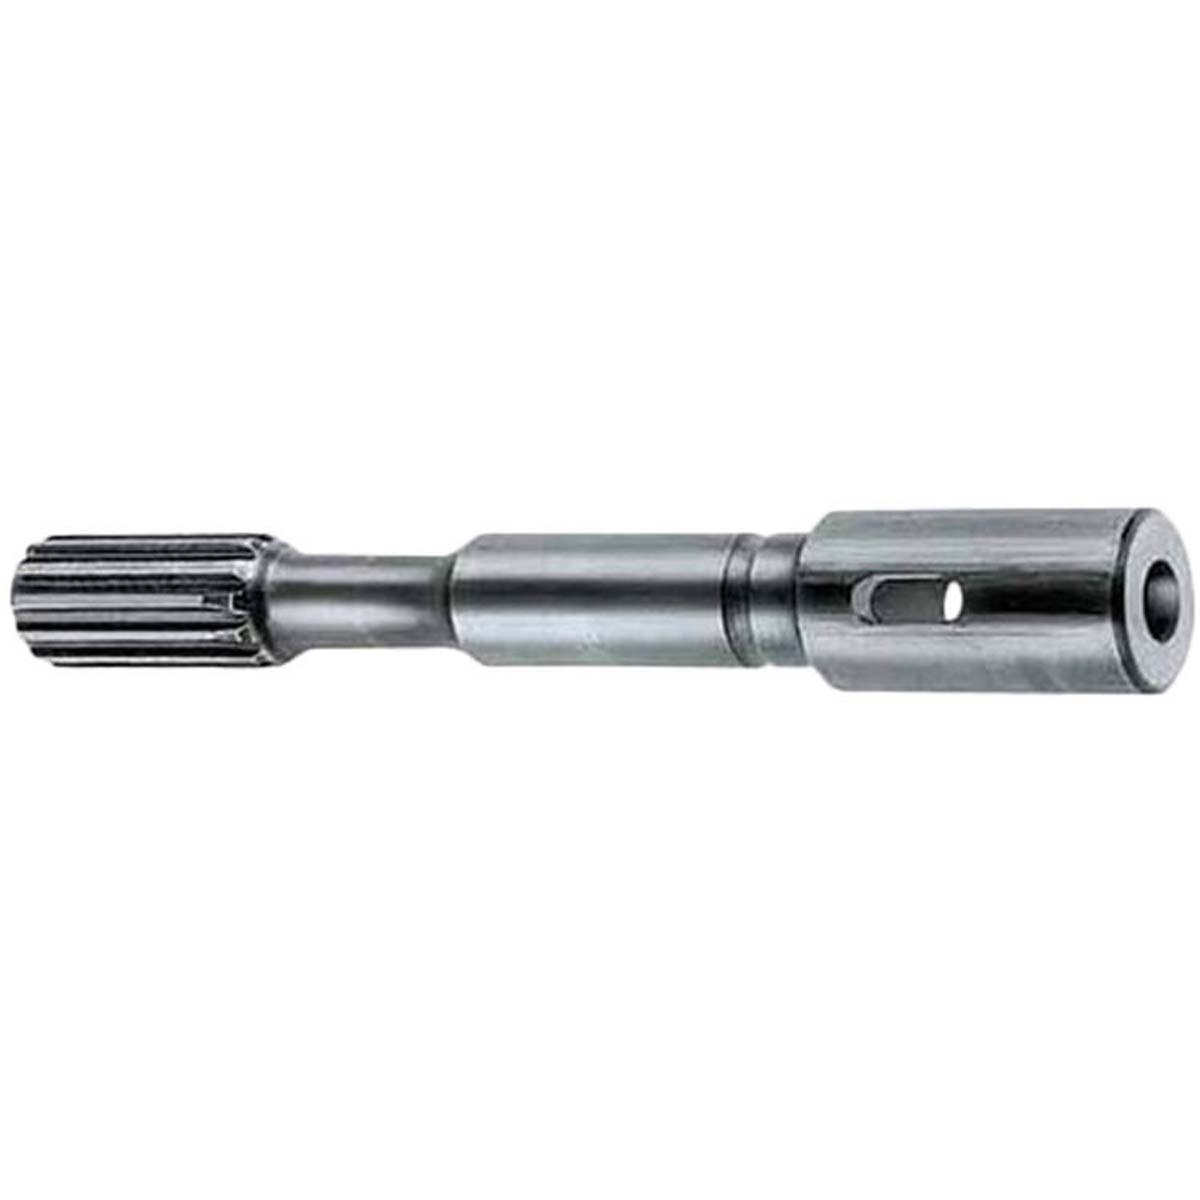 The Milwaukee B taper bit adapter lets you use B taper bits in your spline drive rotary hammer for greater productivity. Get more out of your spline d...